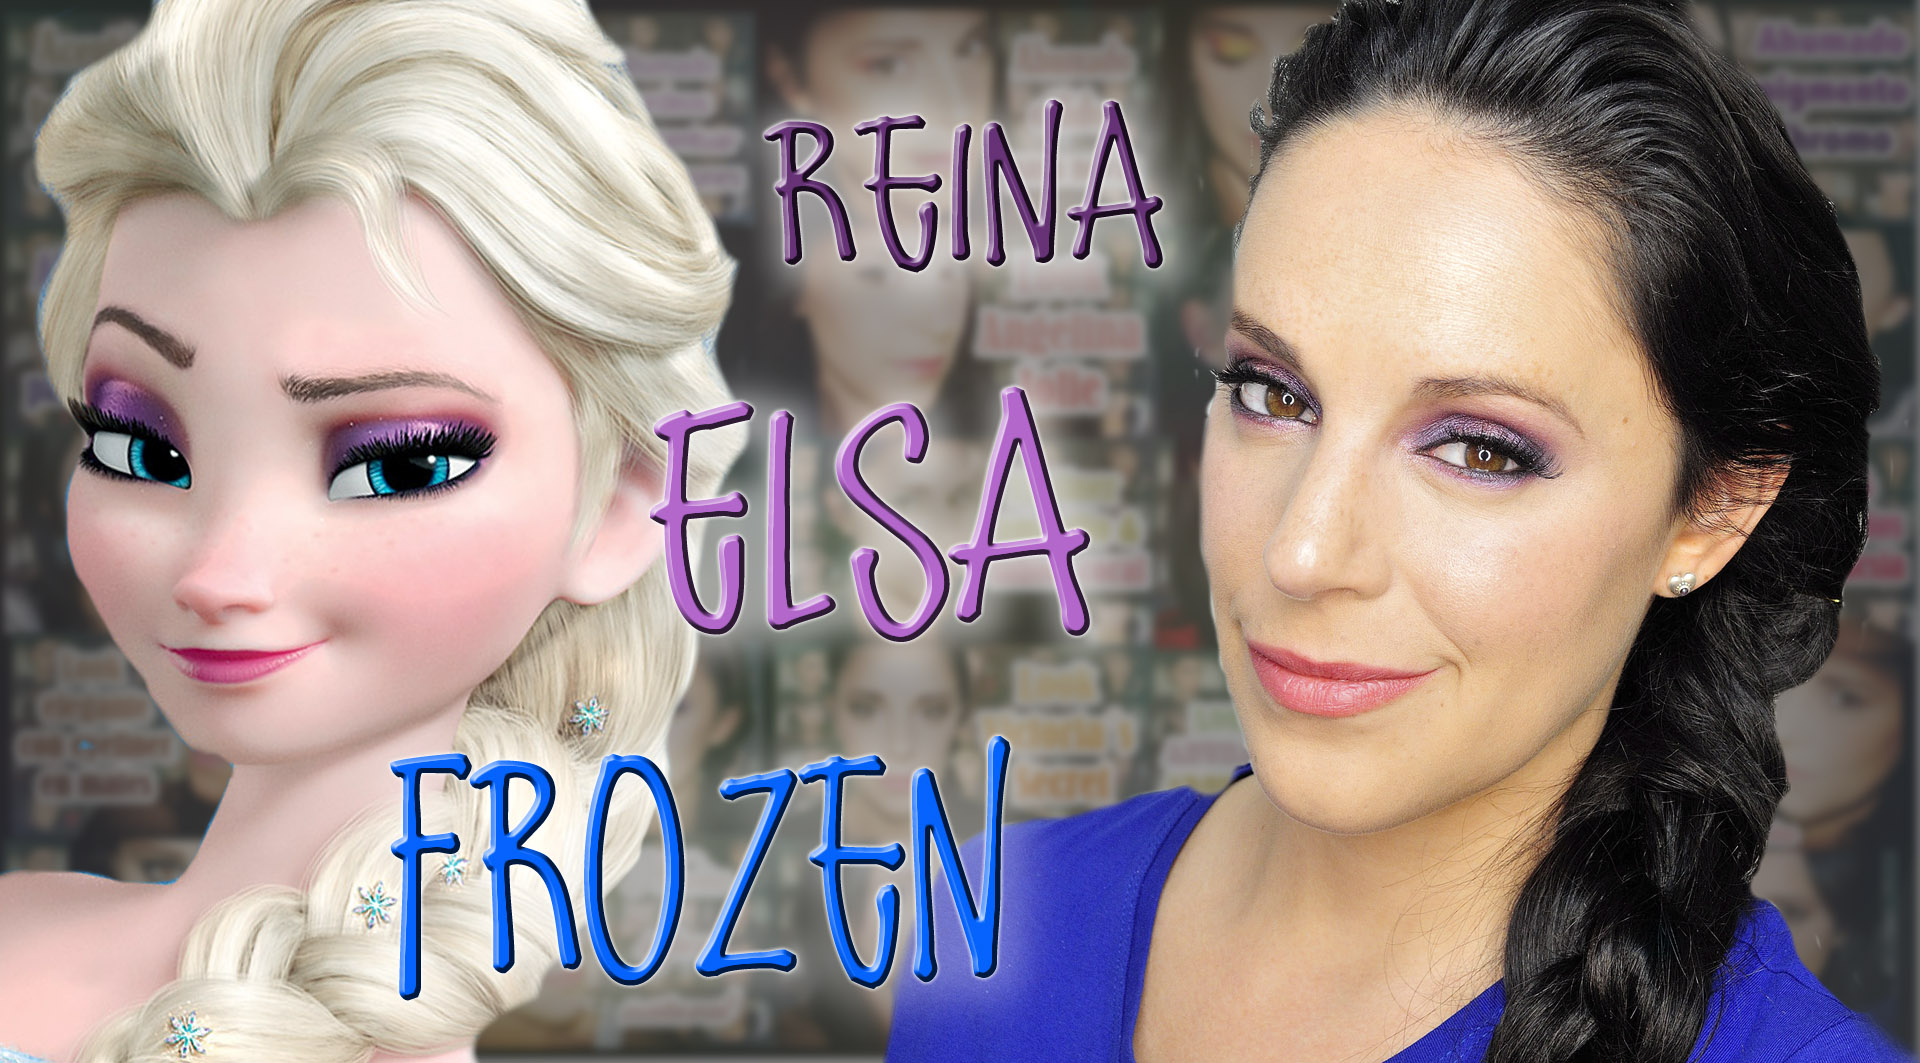 Queen Elsa from Frozen makeup and hairstyle - Silvia Quirós